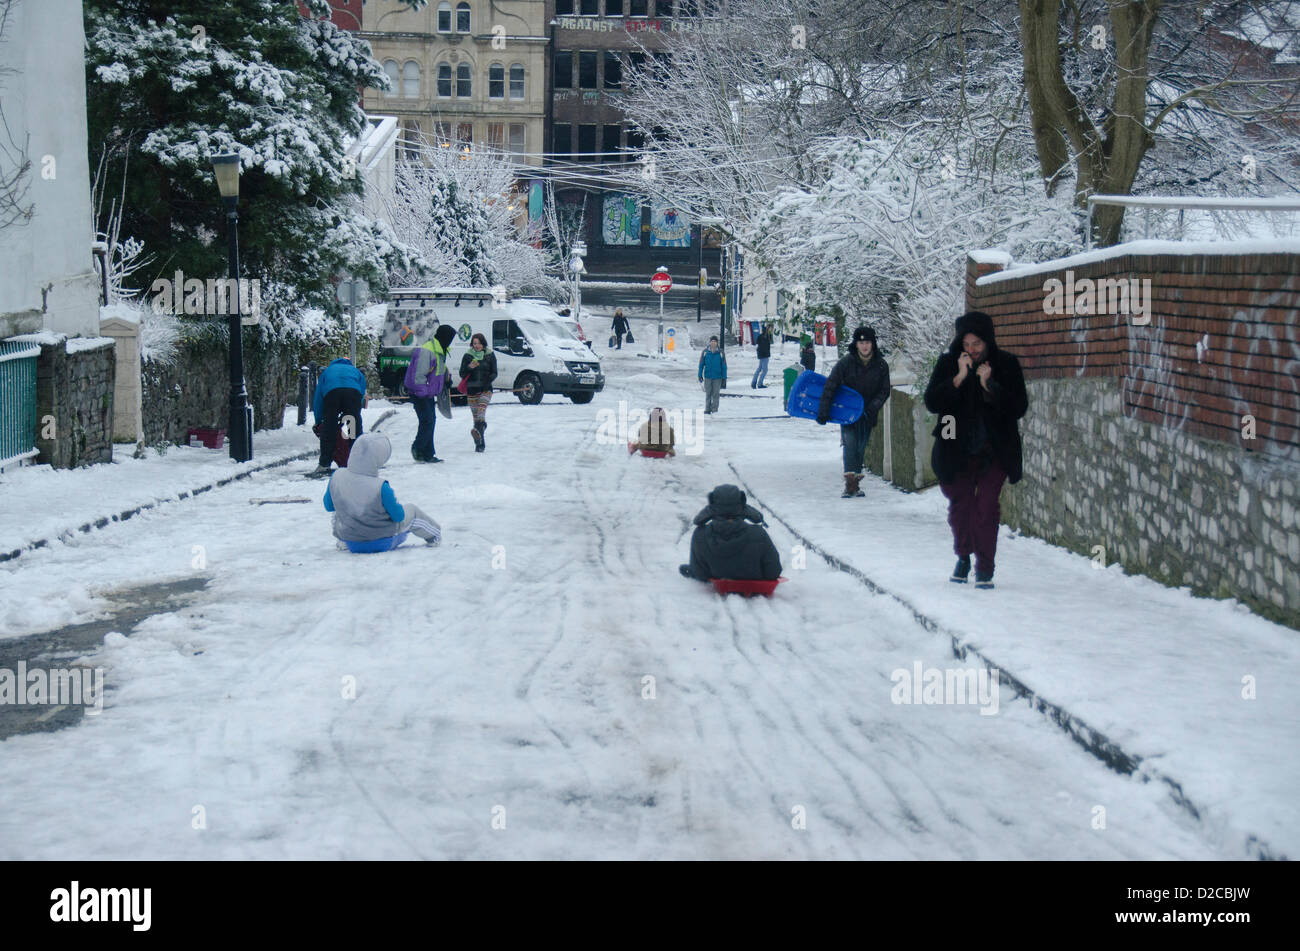 Nine Tree Hill, Bristol, UK, Friday 18th January 2013. People using bobsleds on the road down Nine Tree Hill. Alamy Live News Stock Photo